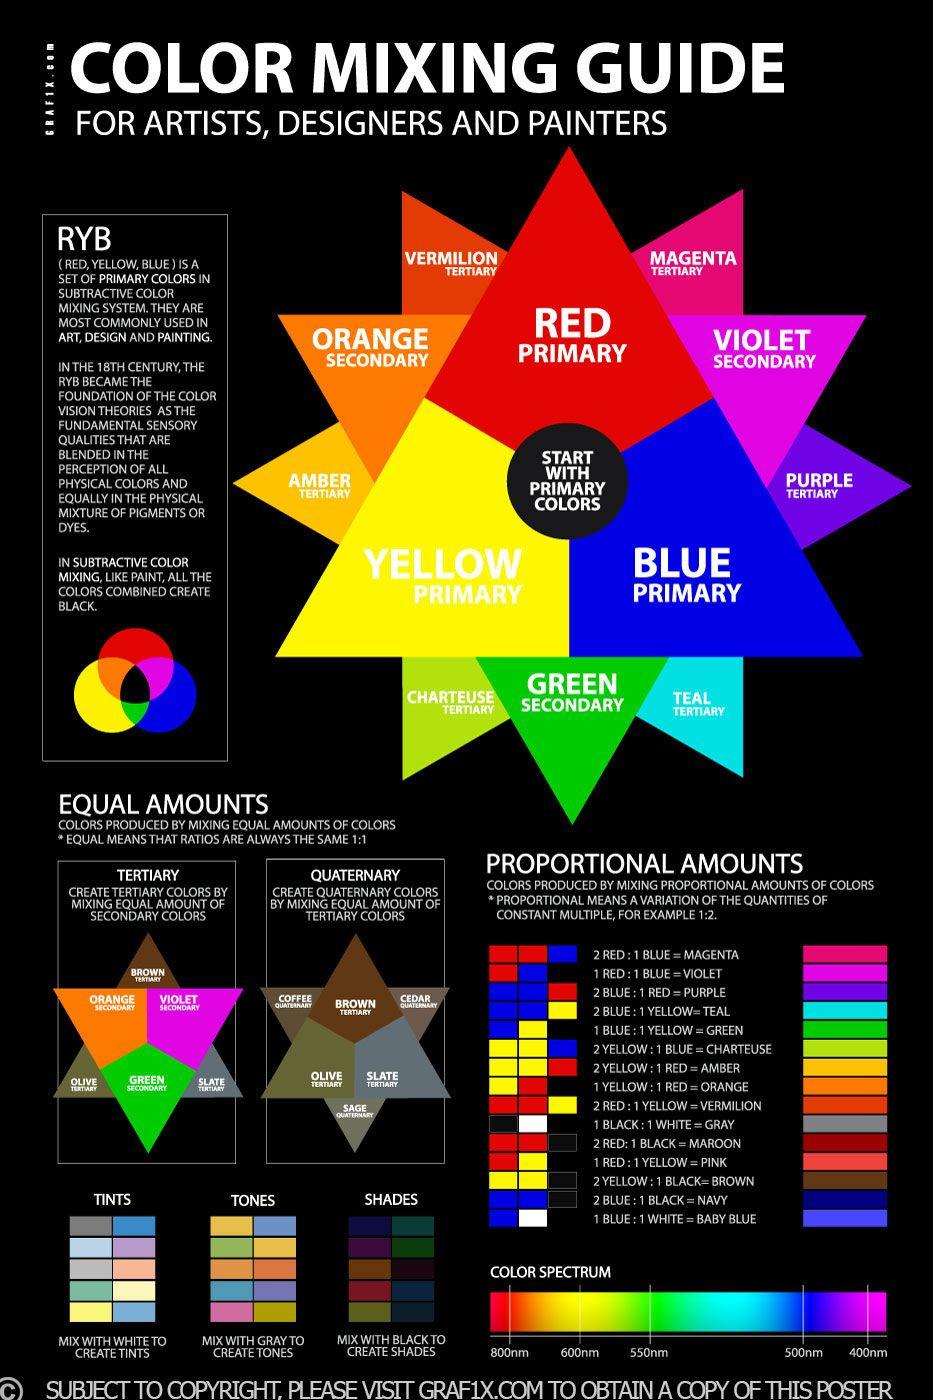 Blue Green Yellow Triangle Logo - Color Meaning and Psychology of Red, Blue, Green, Yellow, Orange ...